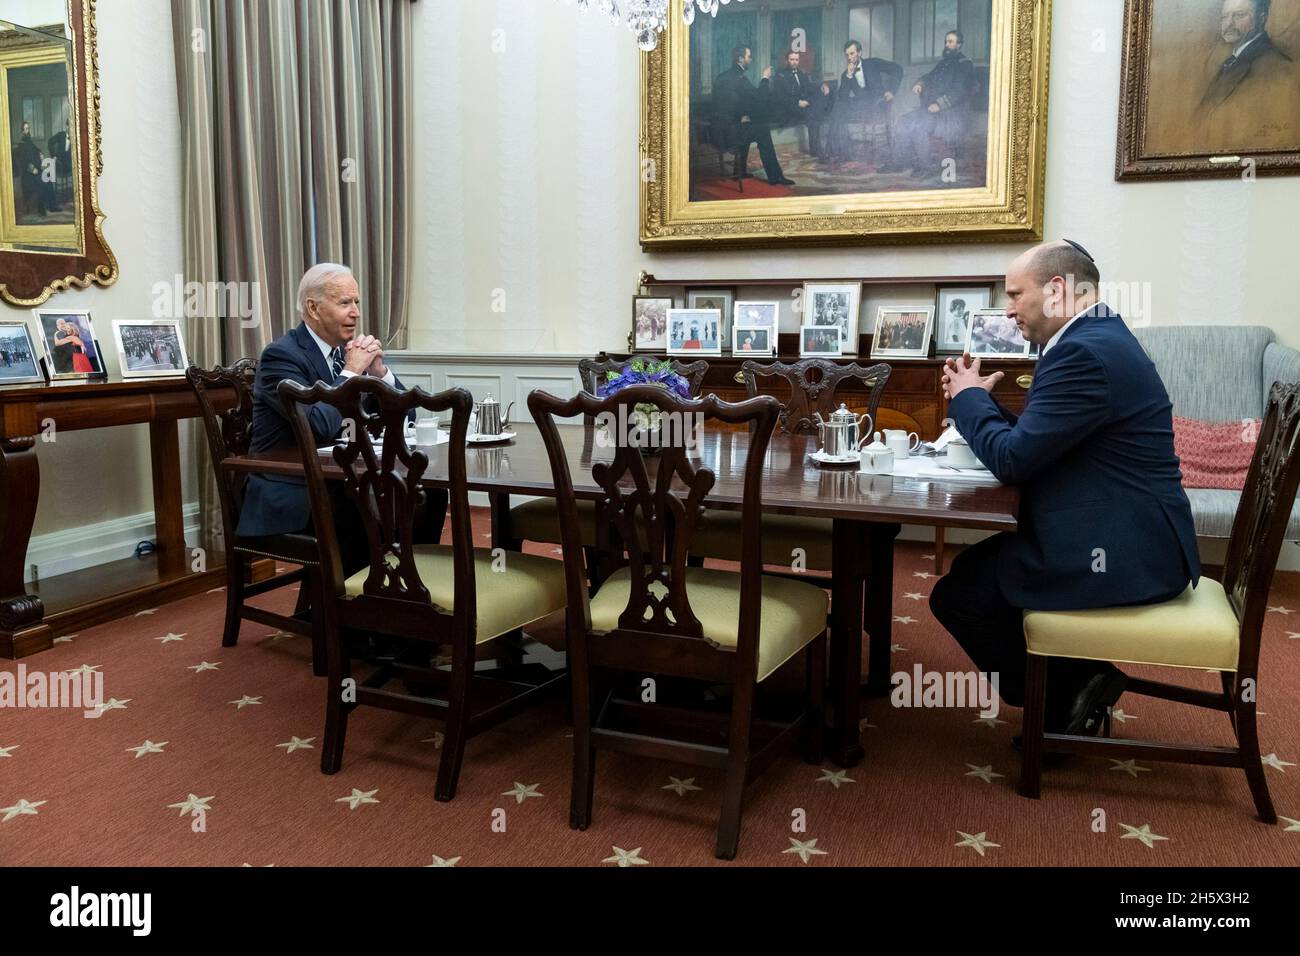 Washington, United States. 27 August, 2021. U.S. President Joe Biden holds a coffee meeting with Israeli Prime Minister Naftali Bennett, right, in the Oval Office Dinning Room of the White House August 27, 2021 in Washington, D.C. Credit: Adam Schultz/White House Photo/Alamy Live News Stock Photo